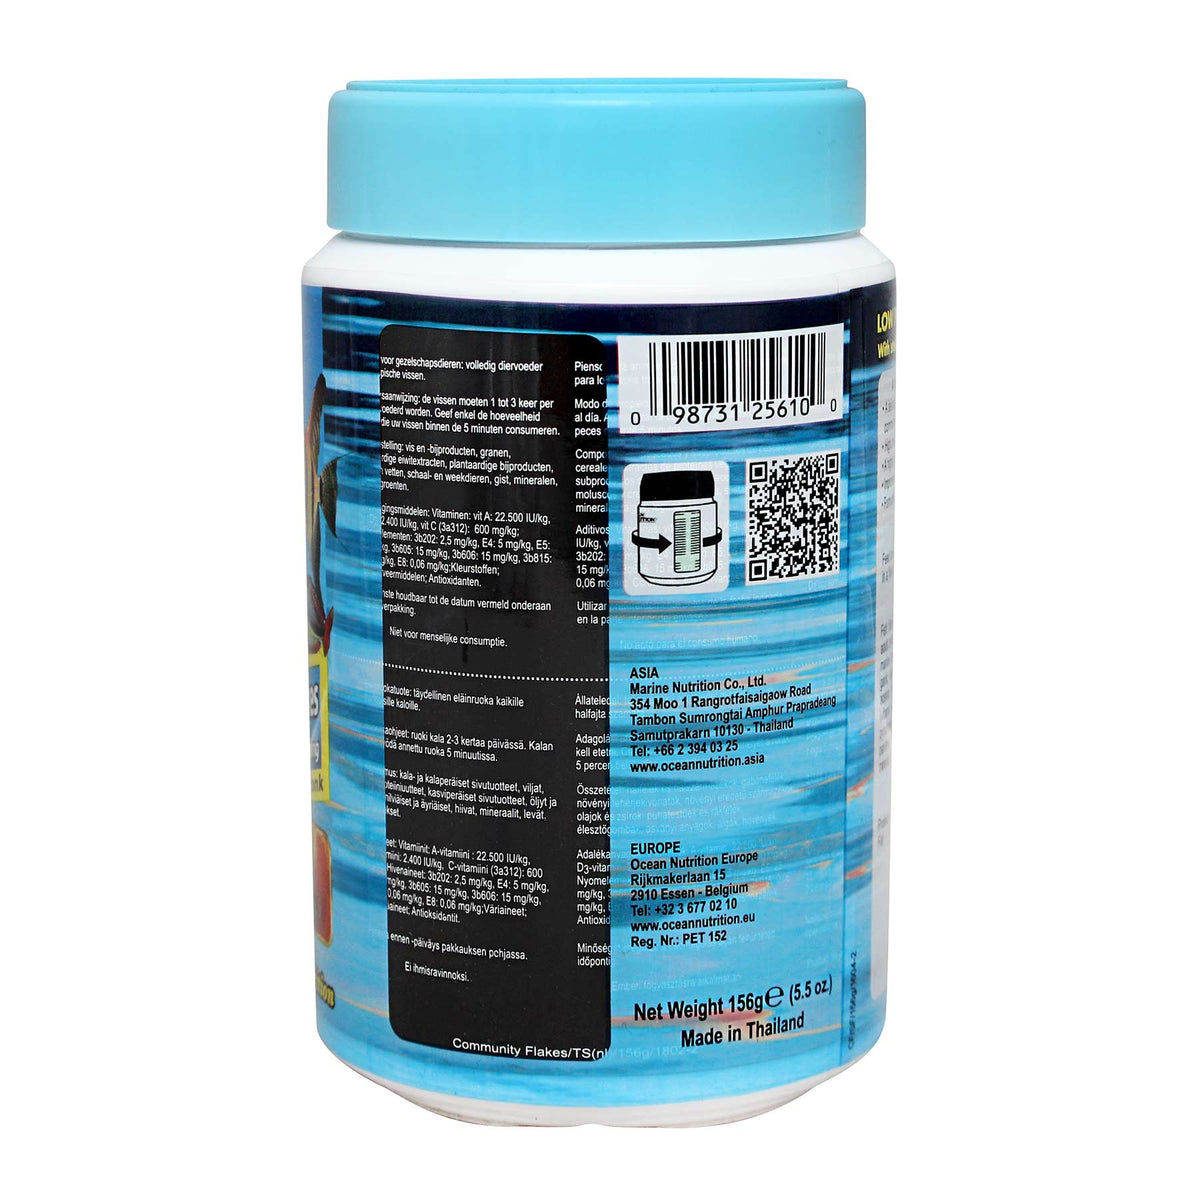 Ocean Nutrition Community Formula Flakes for Freshwater Fish